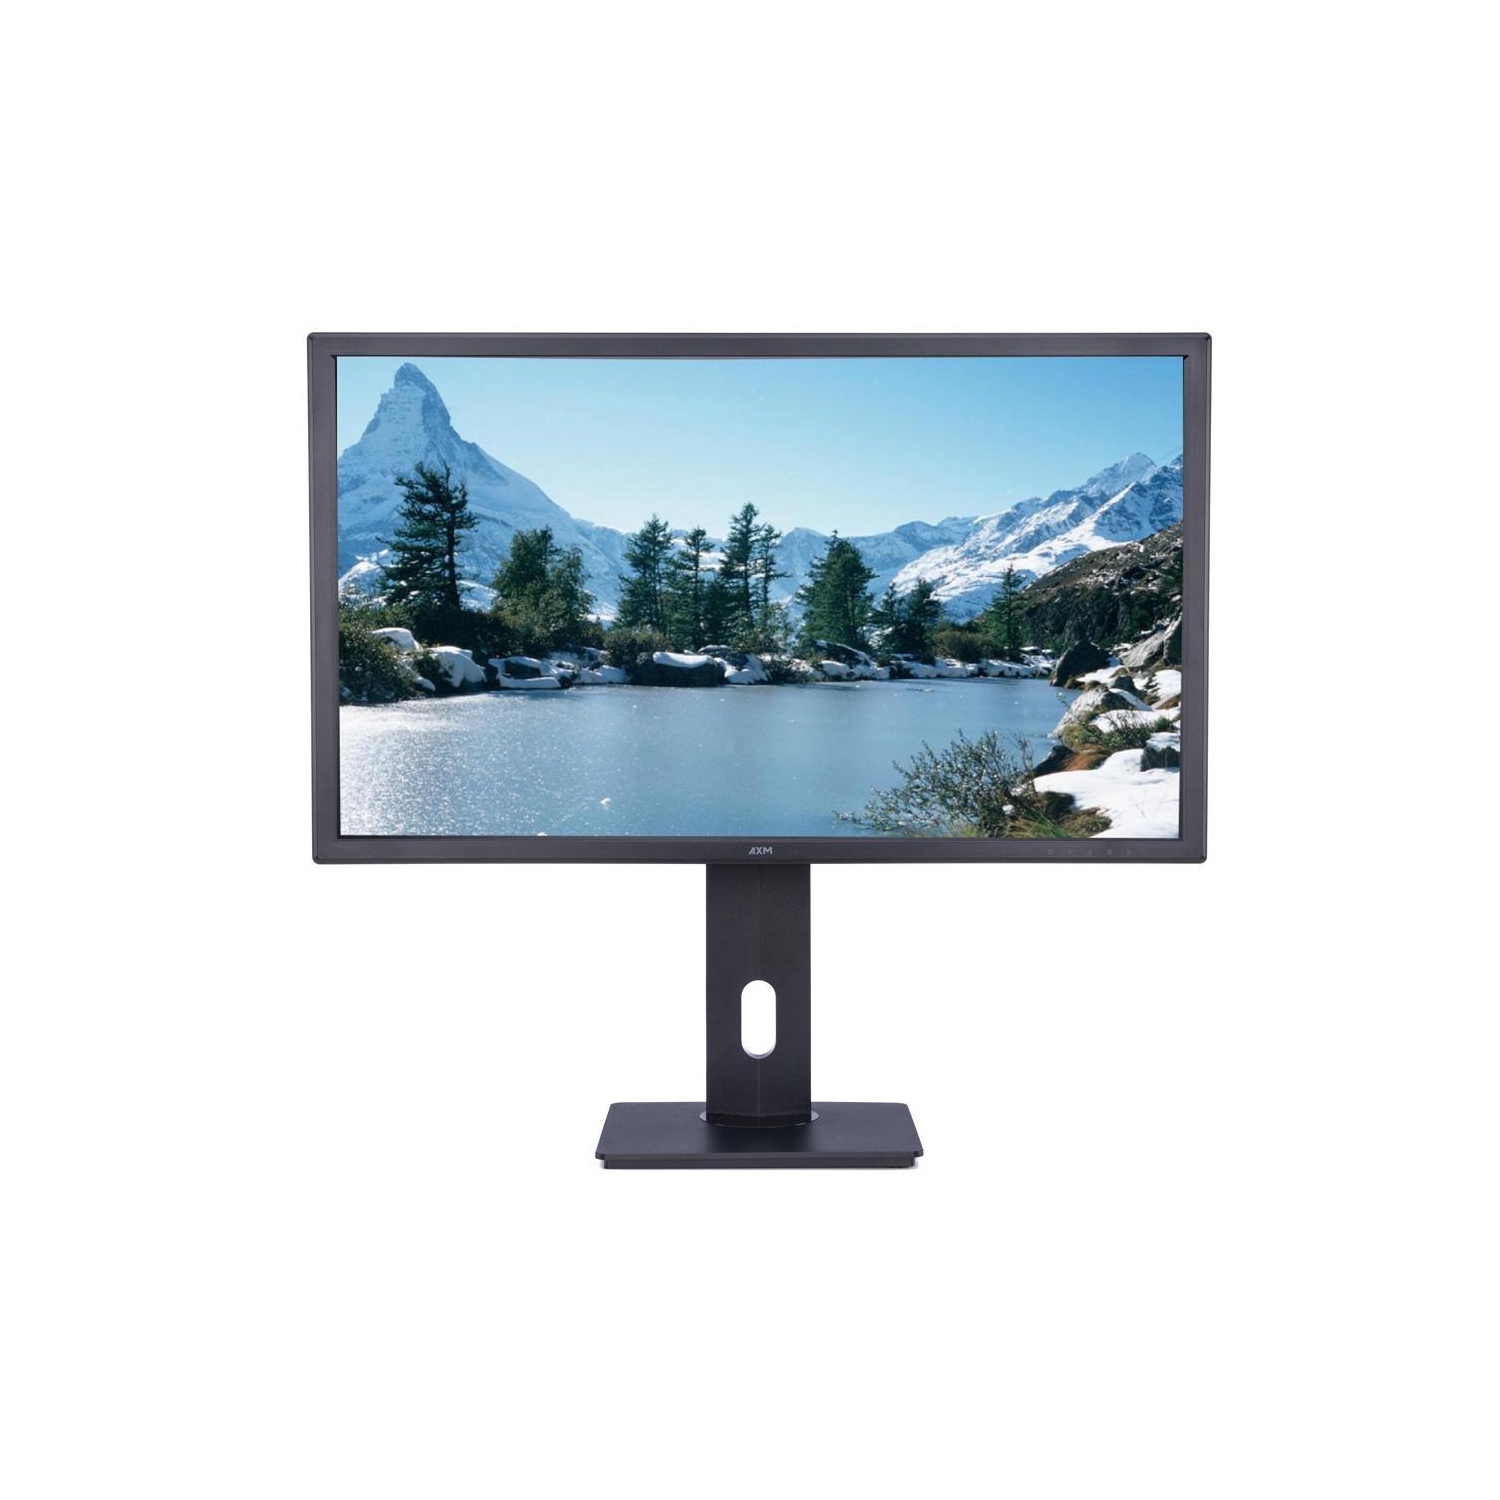 AXIOM 2718 27in WQHD 2560 x 1440 60Hz IPS Gaming Monitor, Adaptive-Sync (FreeSync Compatible), Height Adjustable Stand, Display Port/HDMI, with Speaker